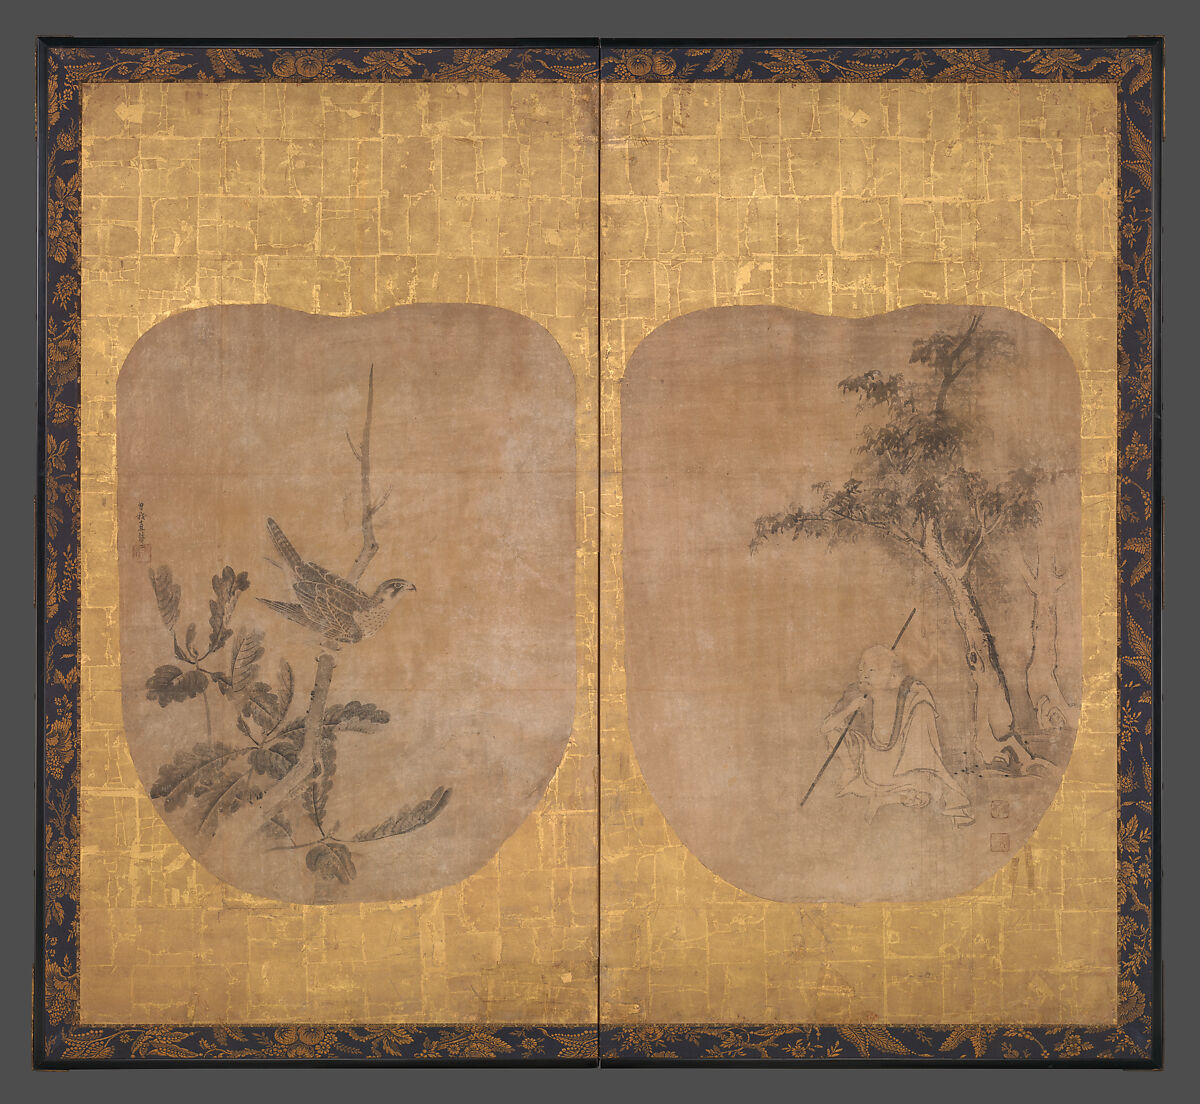 Daoist Sage and Hawk, Soga Nichokuan (Japanese, active mid-17th century), Pair of fan-shaped paintings mounted on two-panel folding screen; ink on paper, Japan 